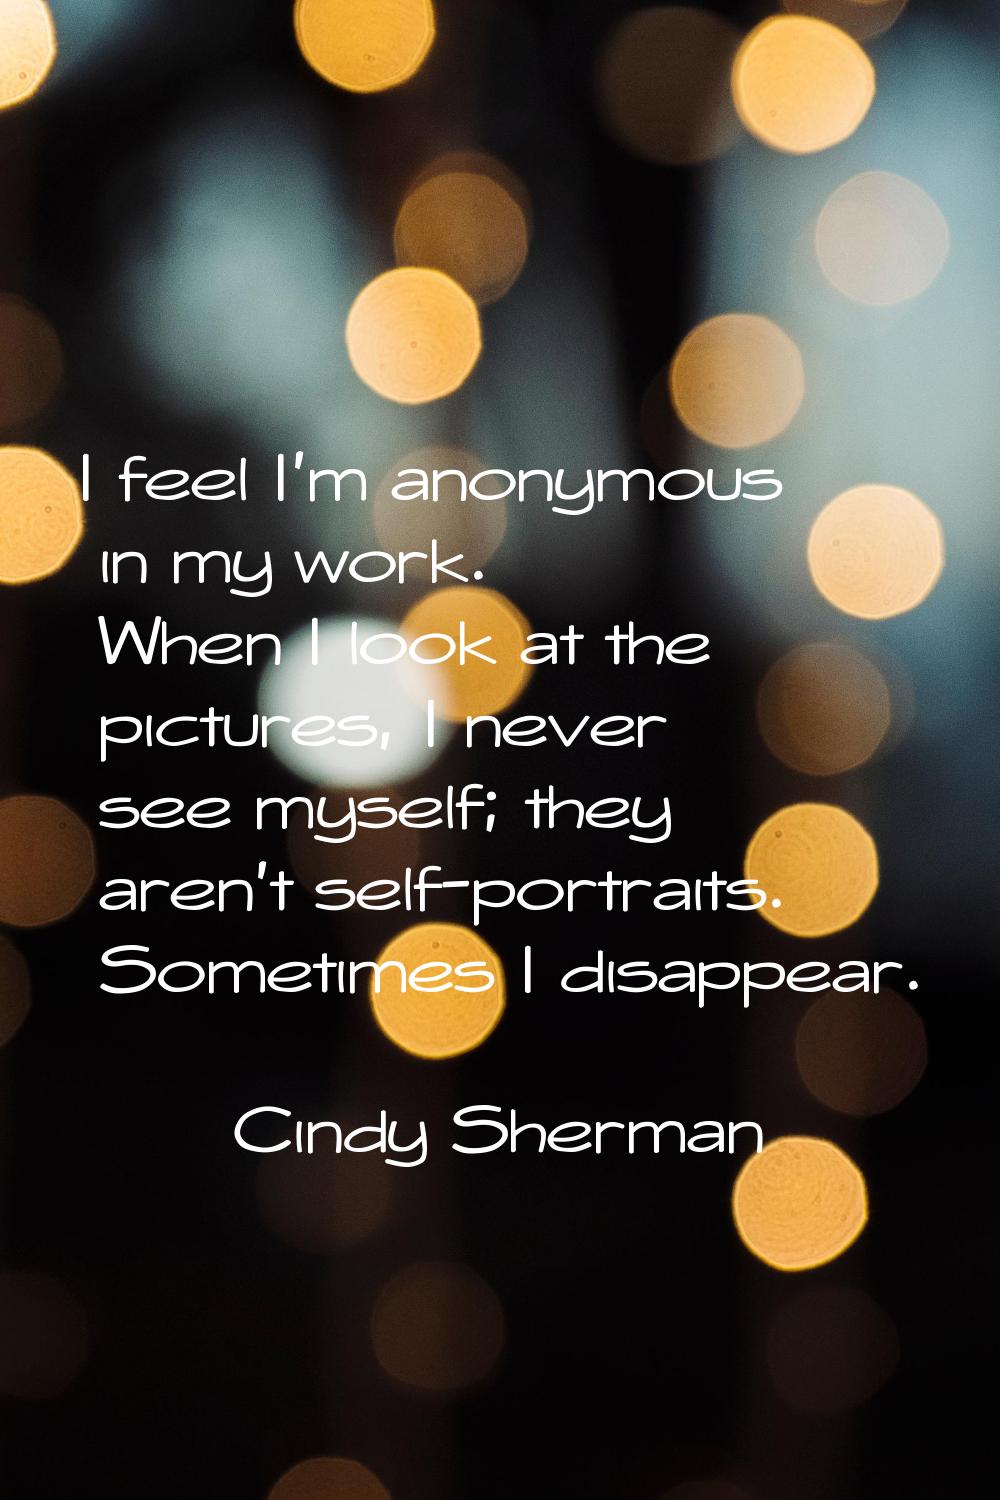 I feel I'm anonymous in my work. When I look at the pictures, I never see myself; they aren't self-